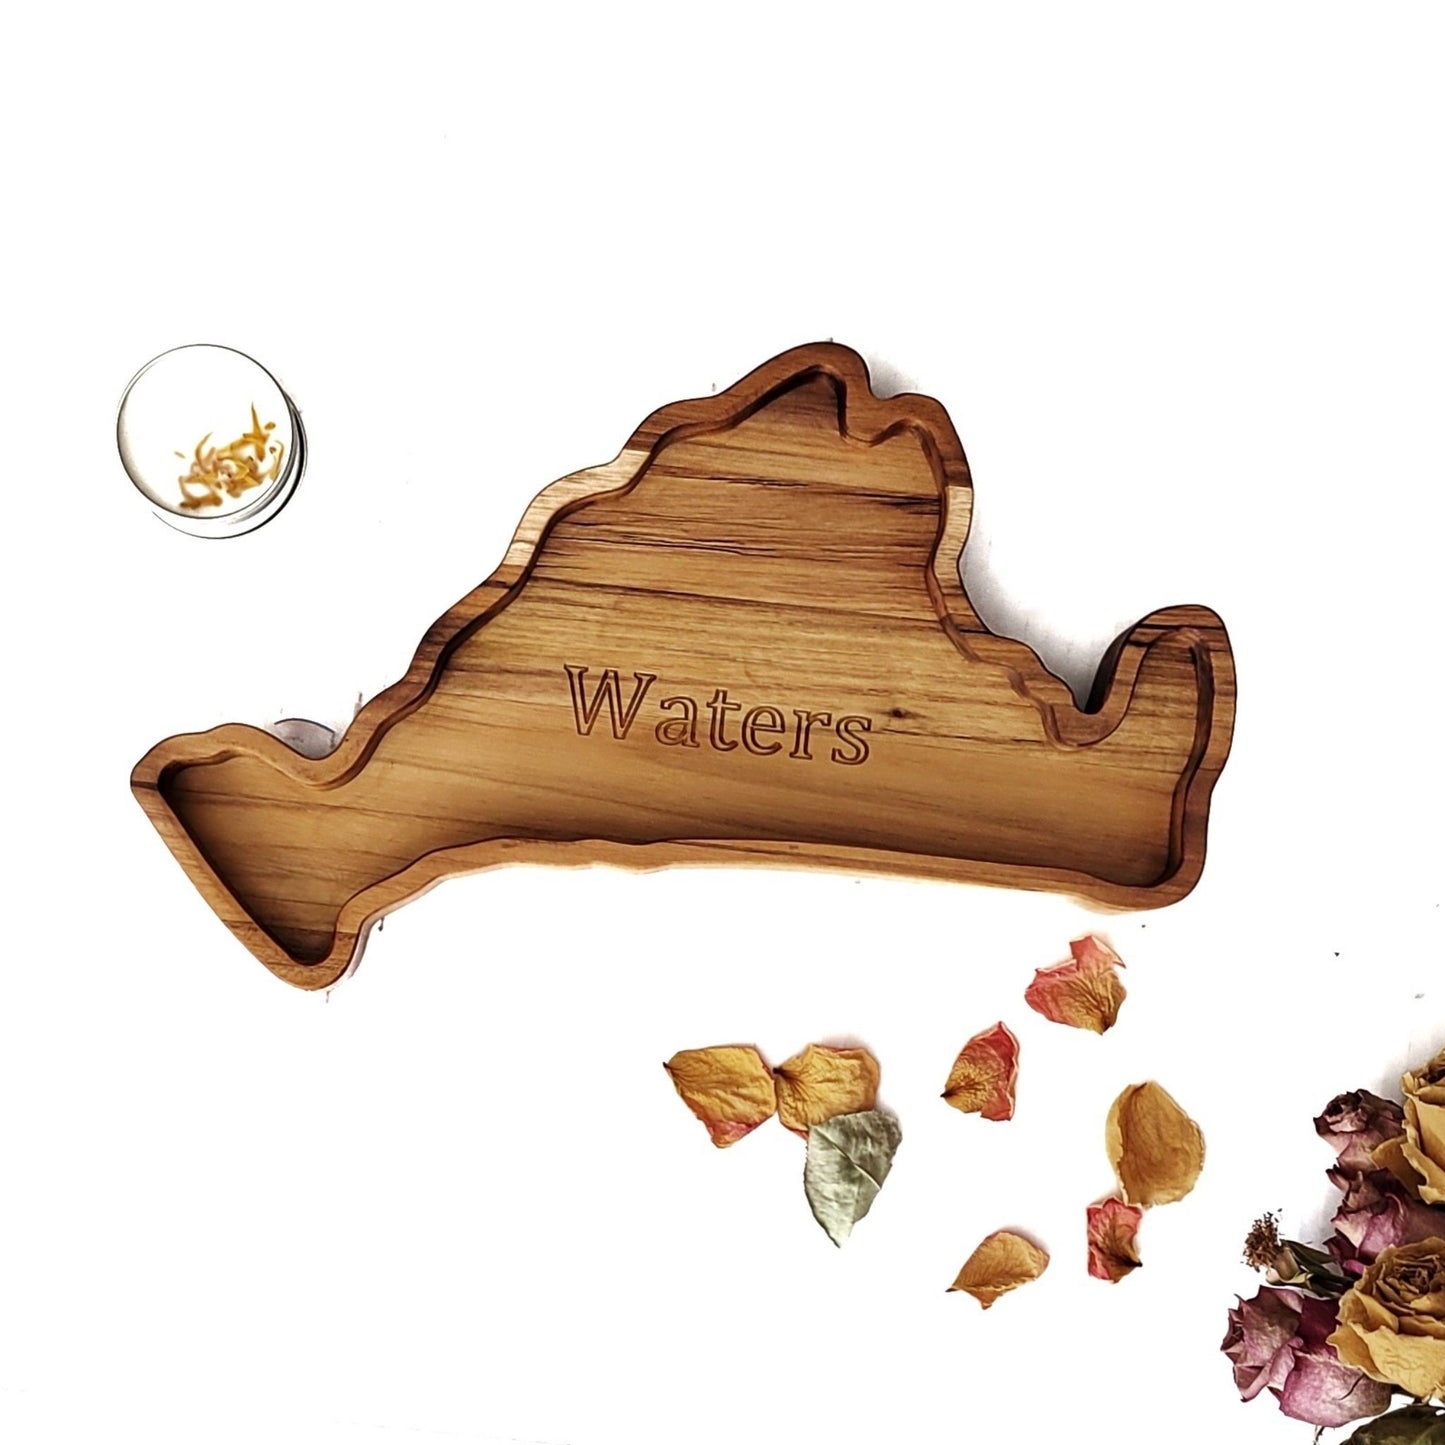 Martha's Vineyard-inspired charcuterie board, crafted from premium wood, with the words engraved on it, perfect for elegant gatherings